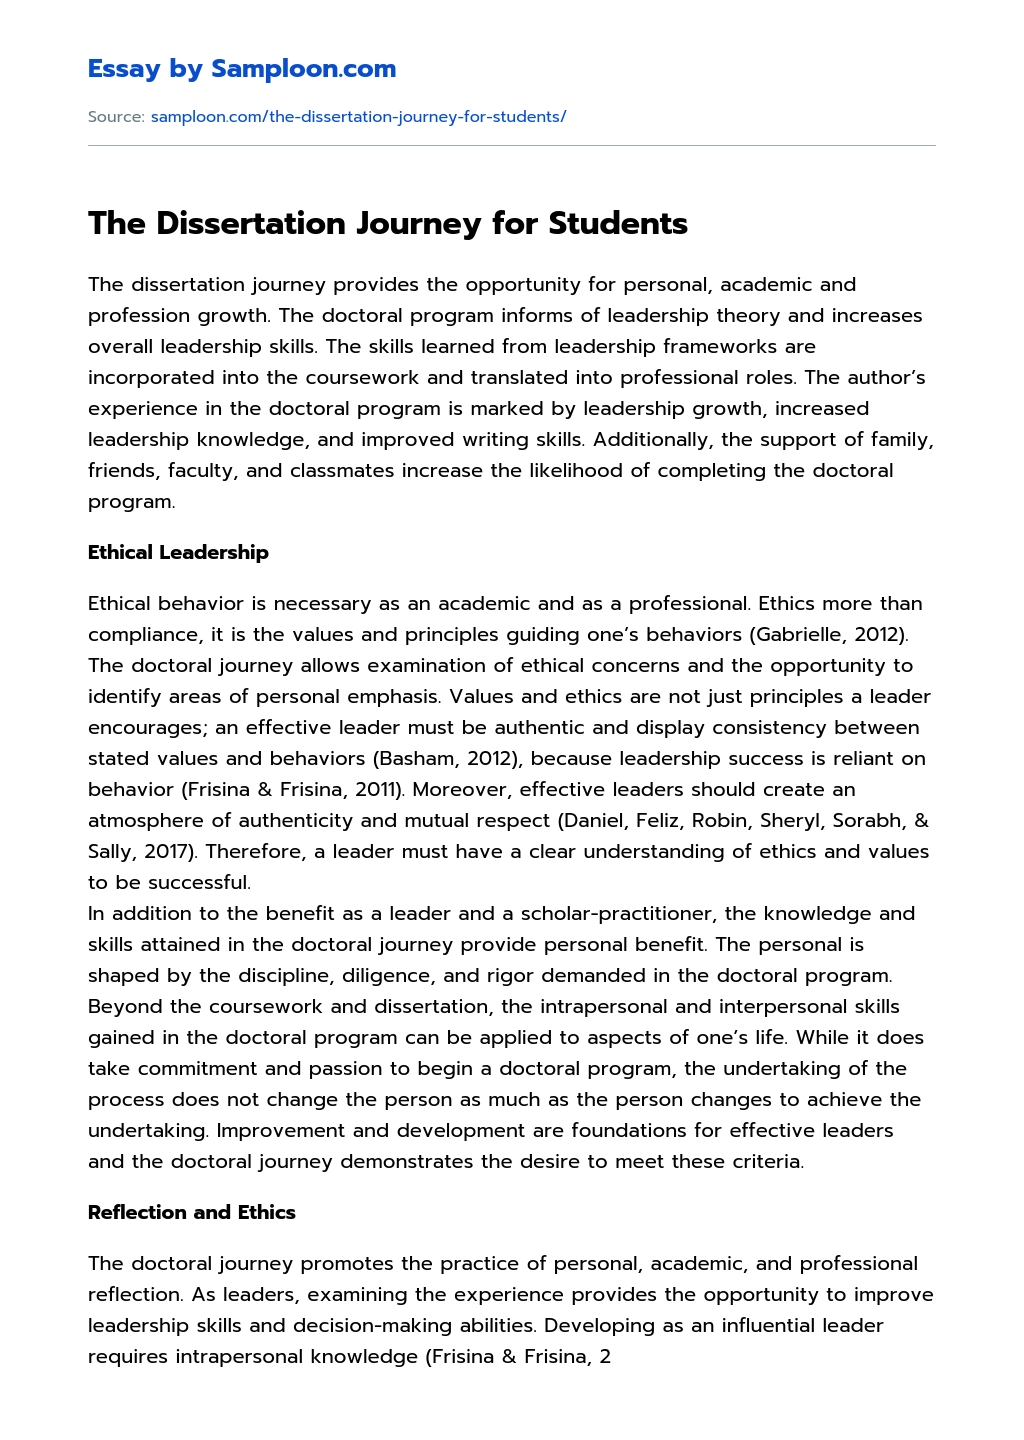 The Dissertation Journey for Students essay